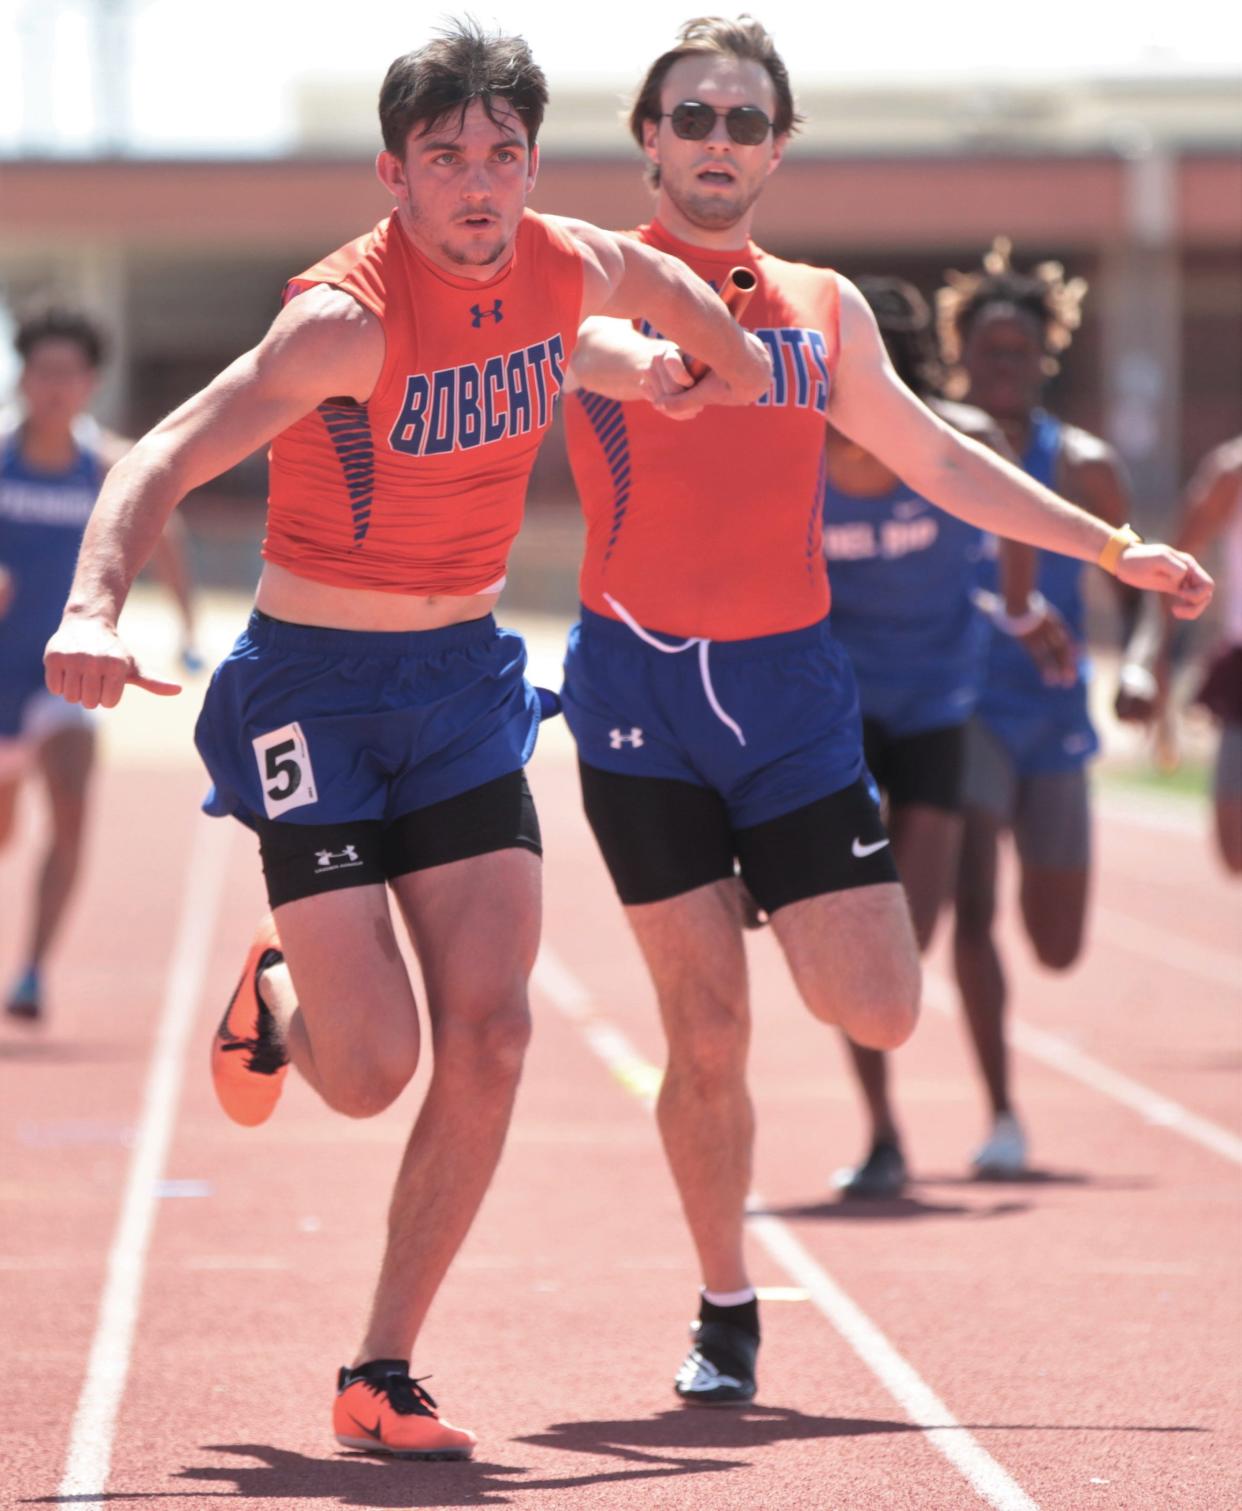 San Angelo Central's Cole McWilliams passes the baton to Tyler Hill during the Division I boys 4x200-meter relay finals at the San Angelo Relays on Saturday, March 26, 2022, at San Angelo Stadium.